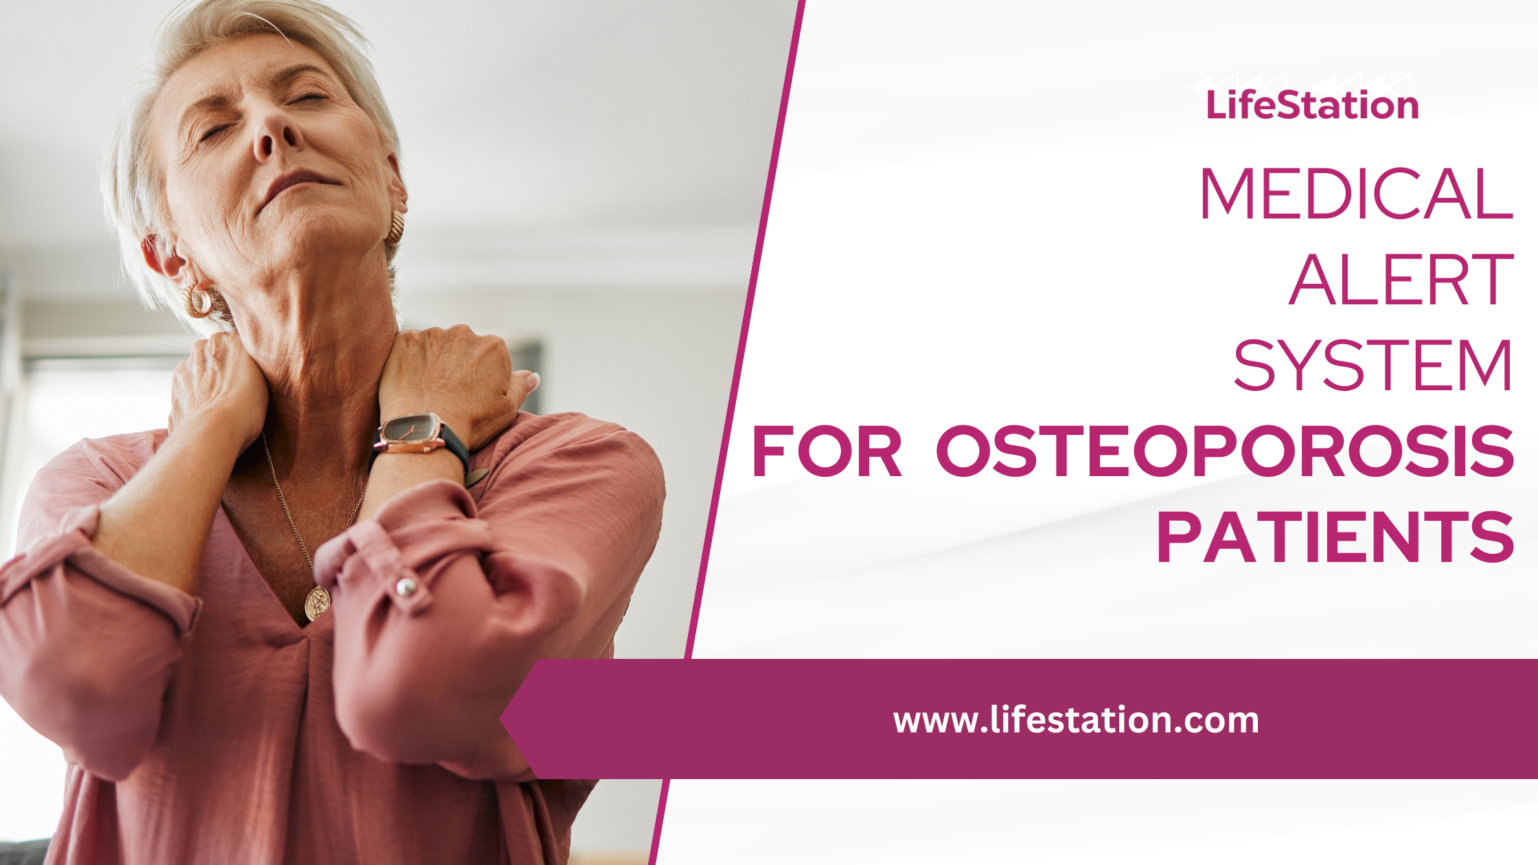 senior adjusting her neck, LifeStation provides security with out medical alert system for osteoporosis patients, ensuring help is always nearby.